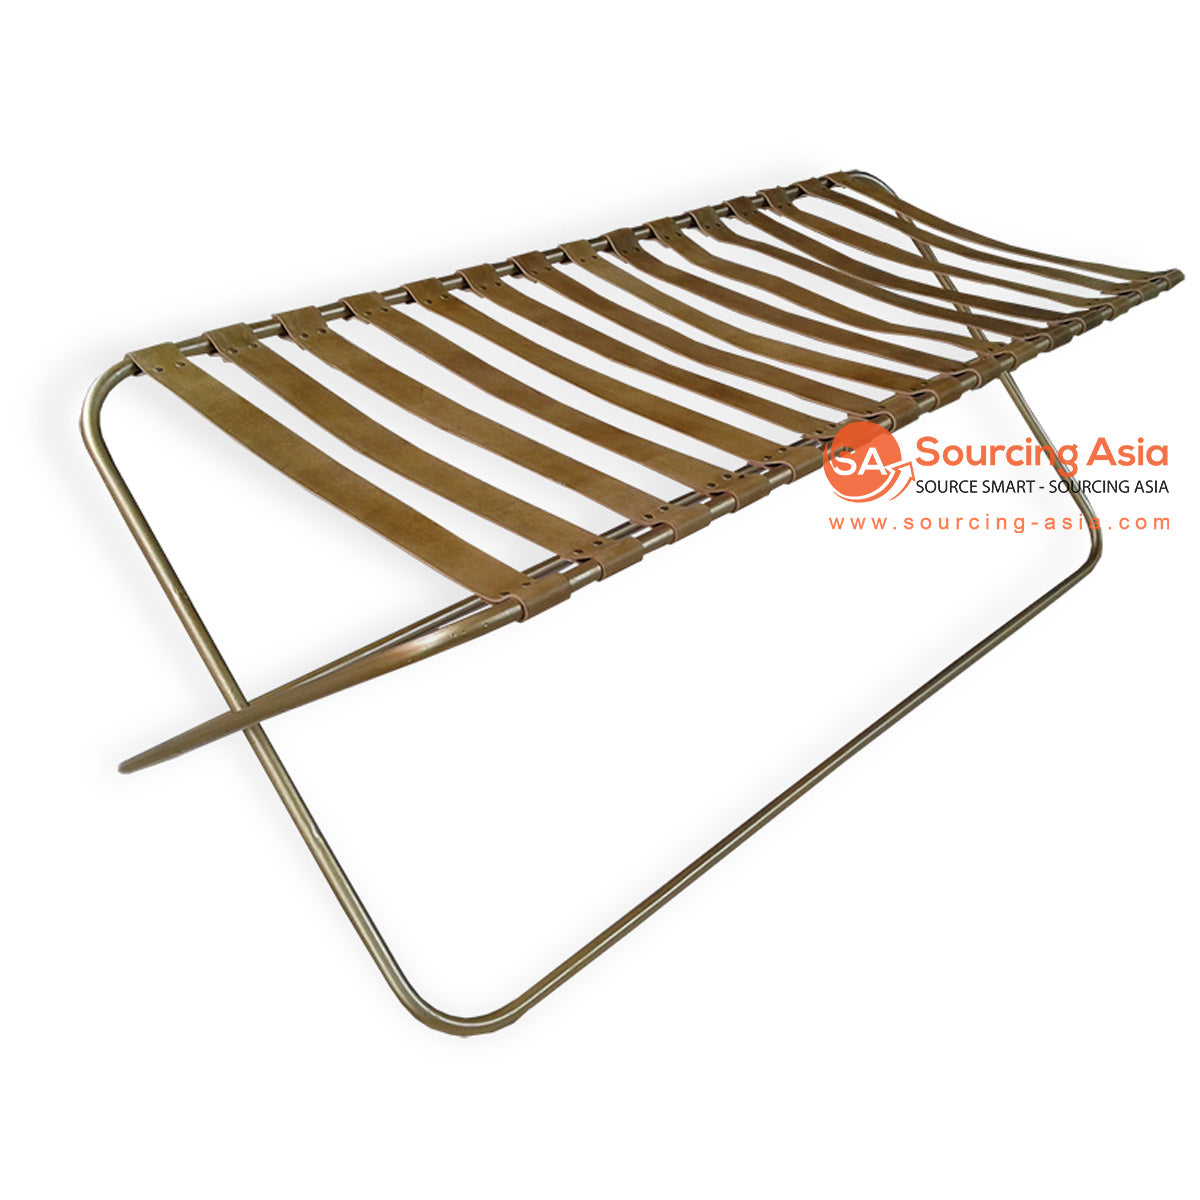 RBW058 METAL LUGGAGE RACK WITH BROWN LEATHER STRAPS